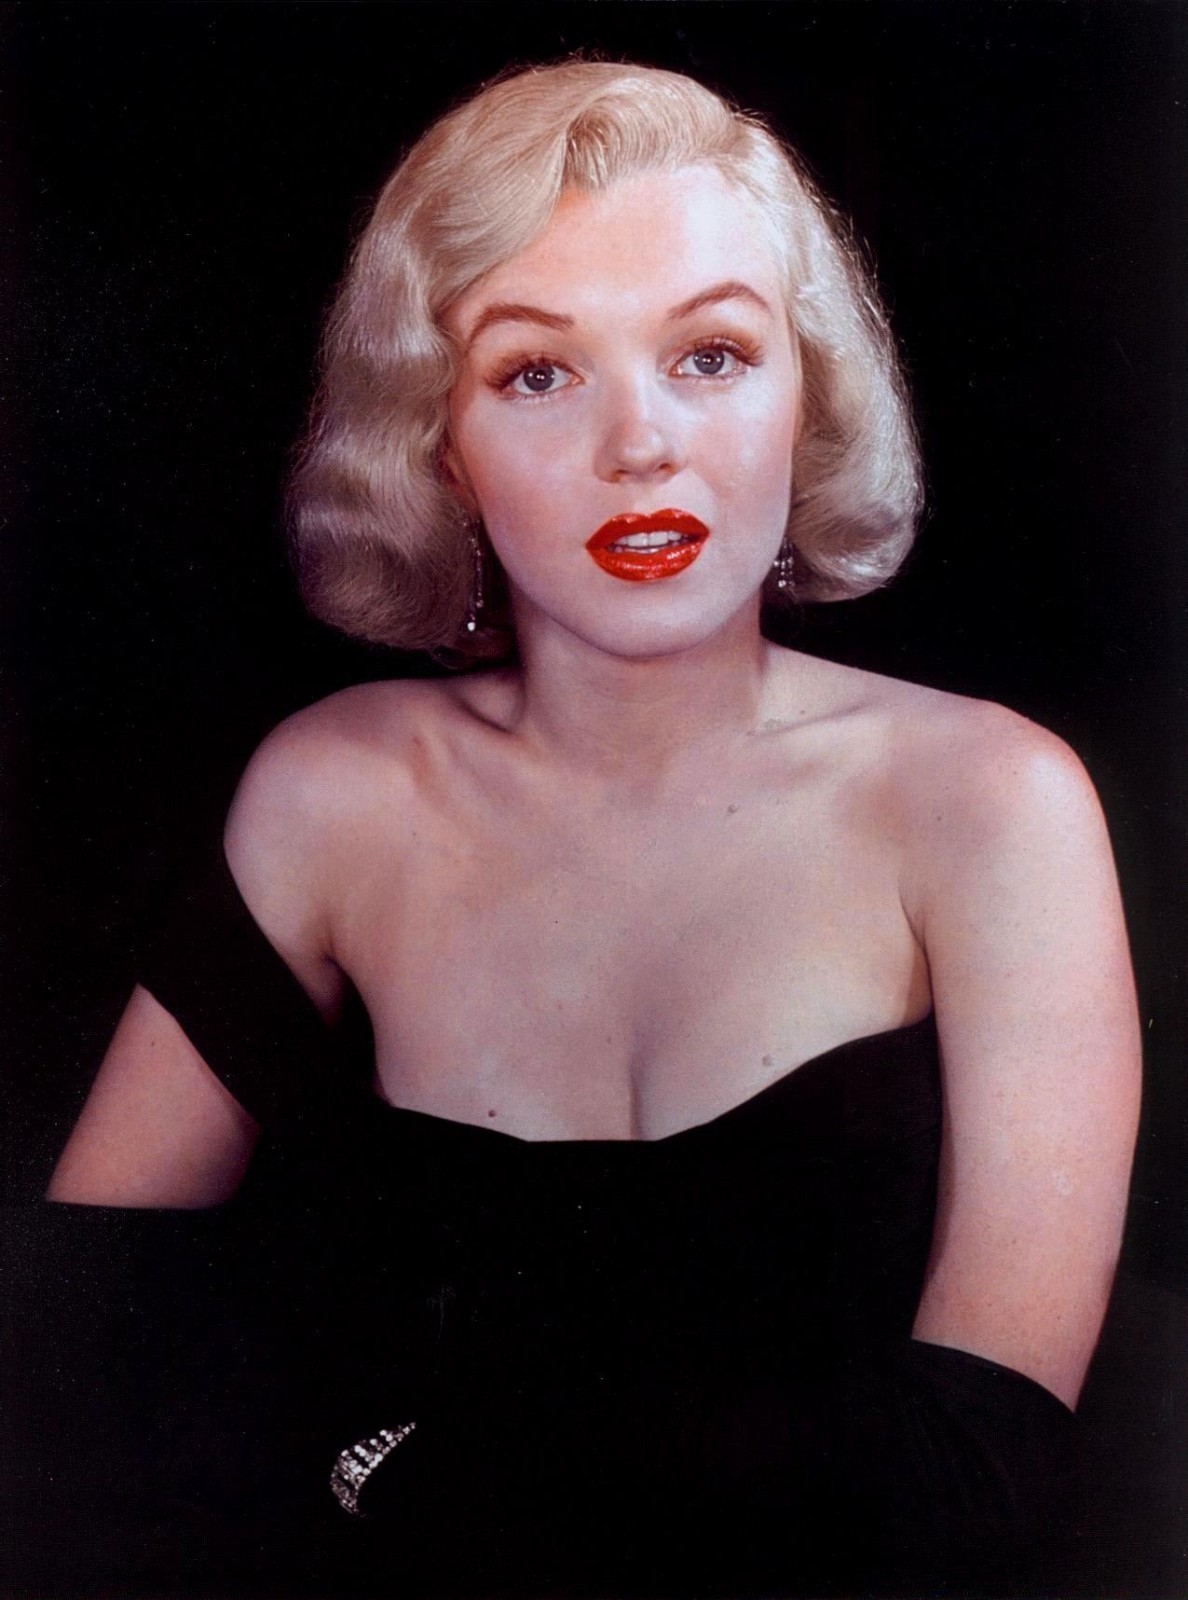 Marilyn Monroe - Celebrities who died young Photo (36755152) - Fanpop1188 x 1600